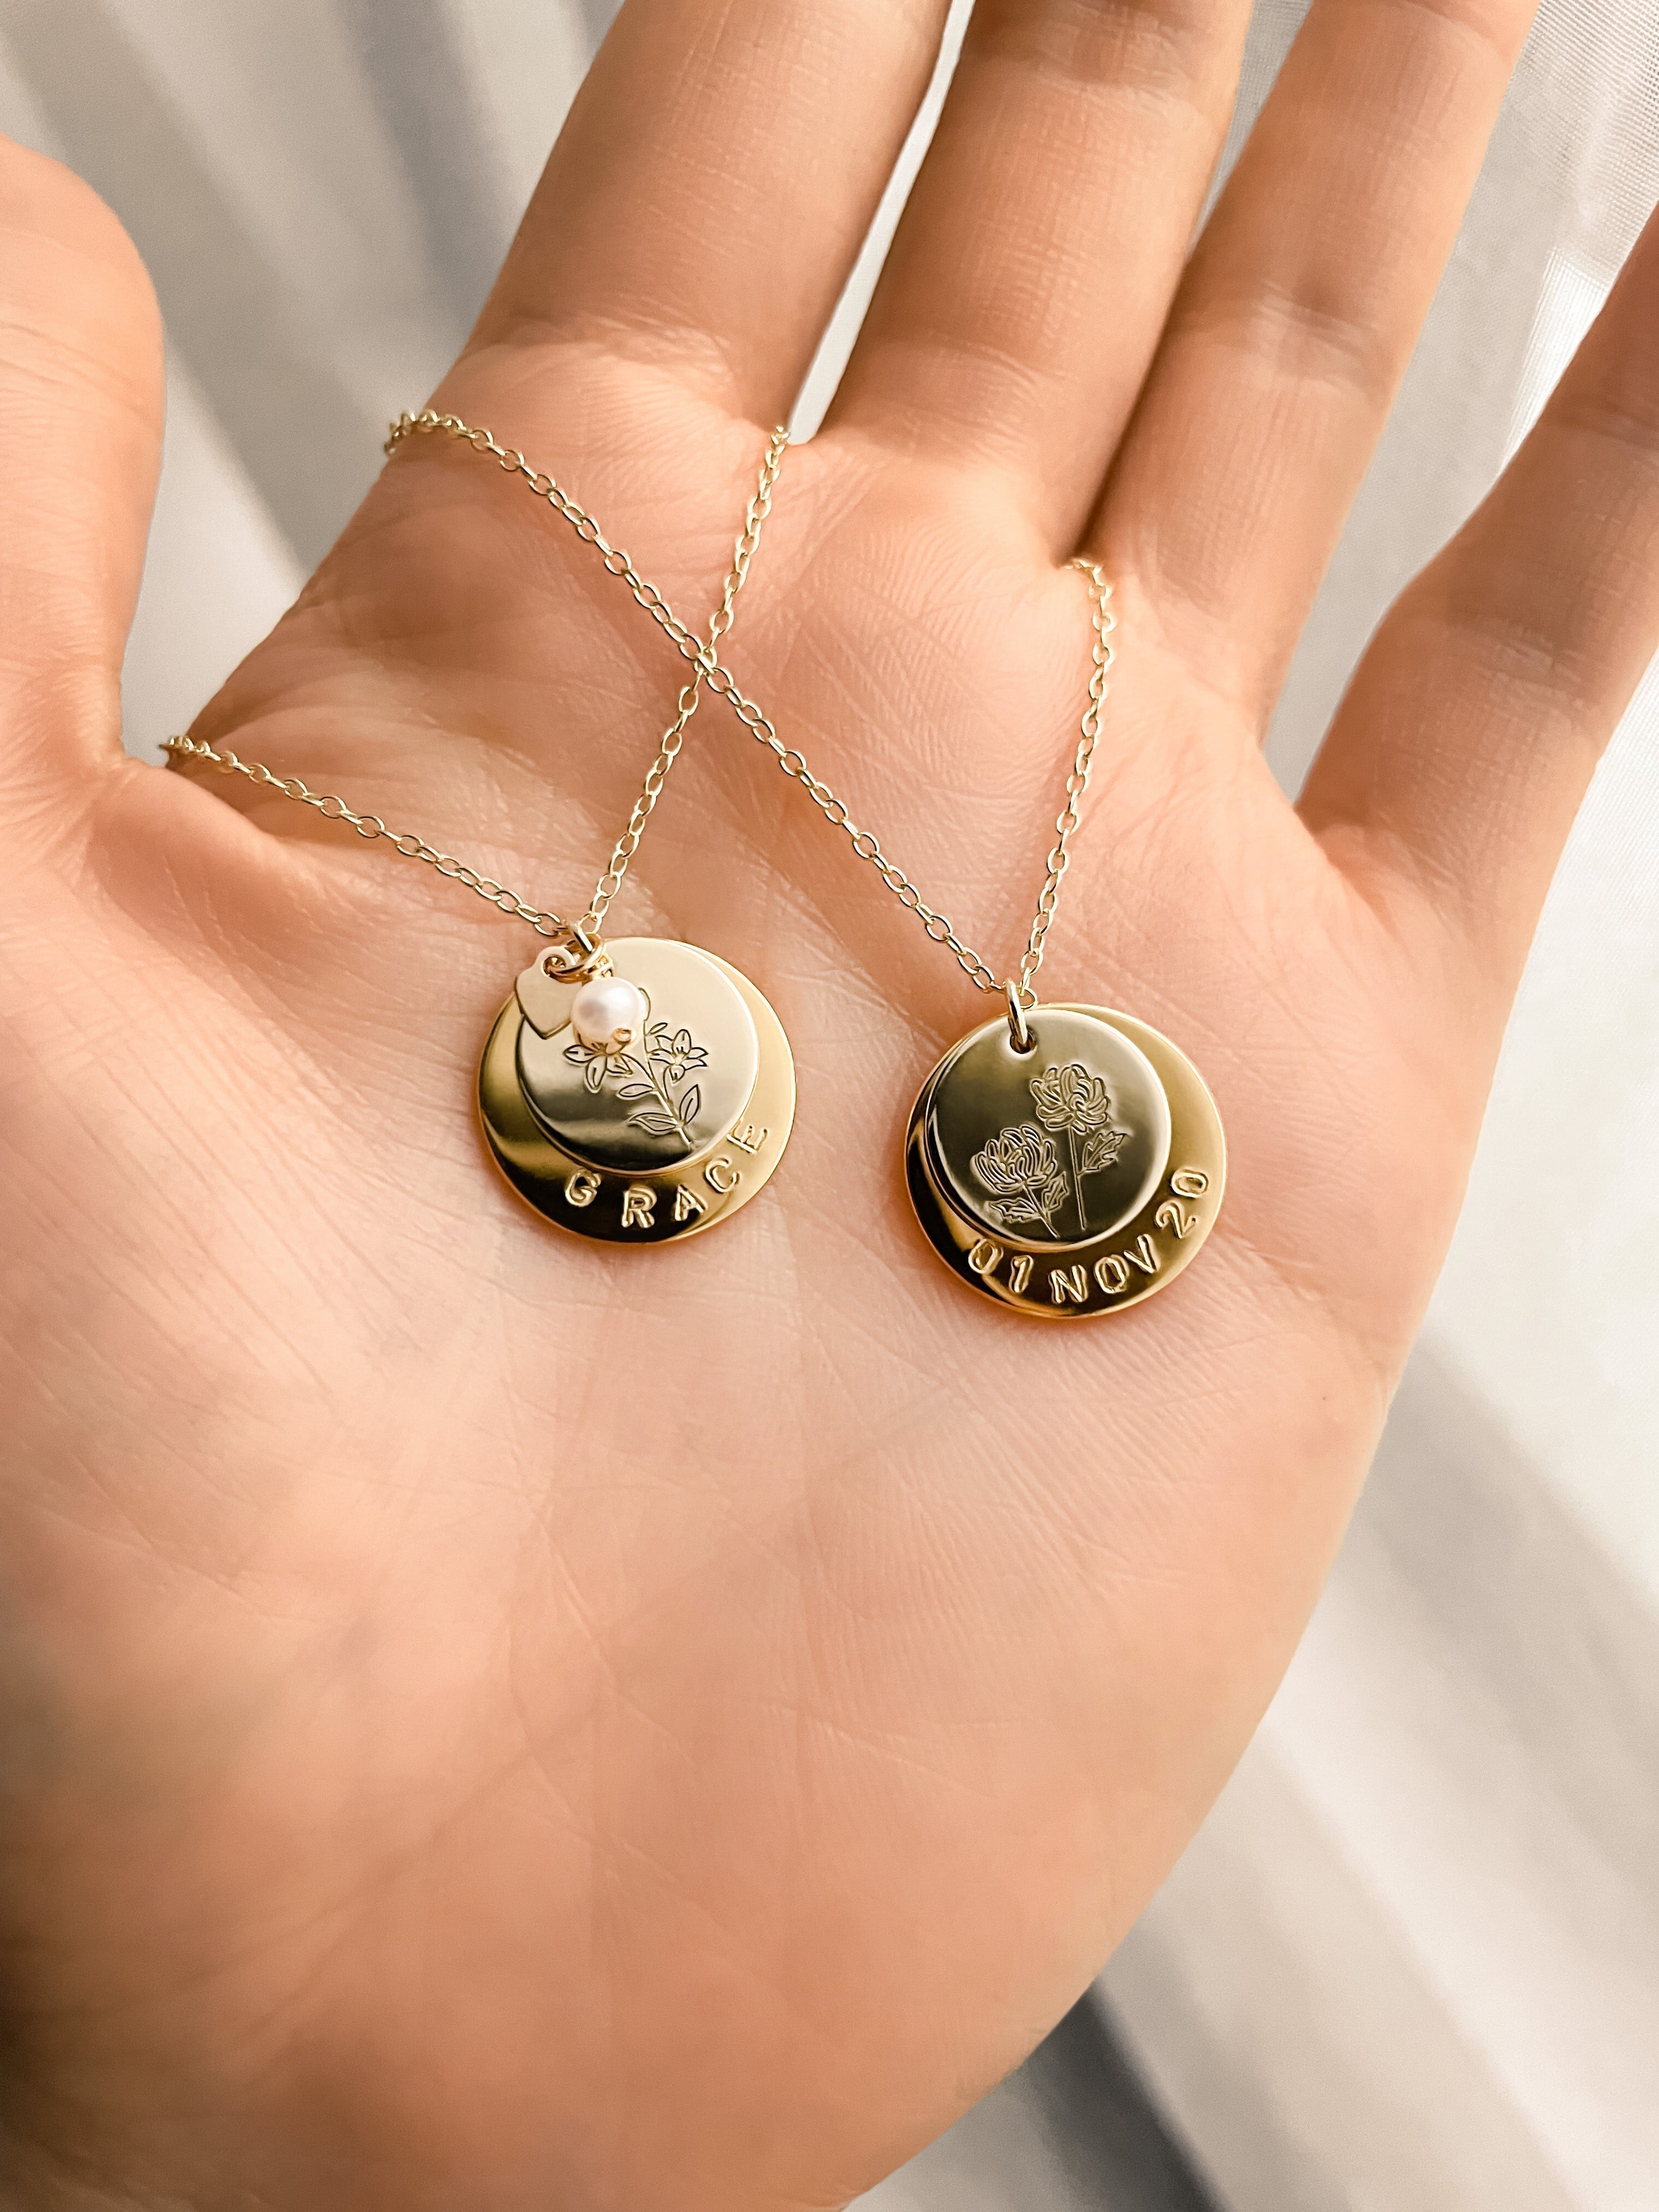 Tender Objects Fleur Stacked Disc Necklace with birthflower customization - Personalized with names or dates, hand-stamped for a unique and elegant accessory crafted just for you.